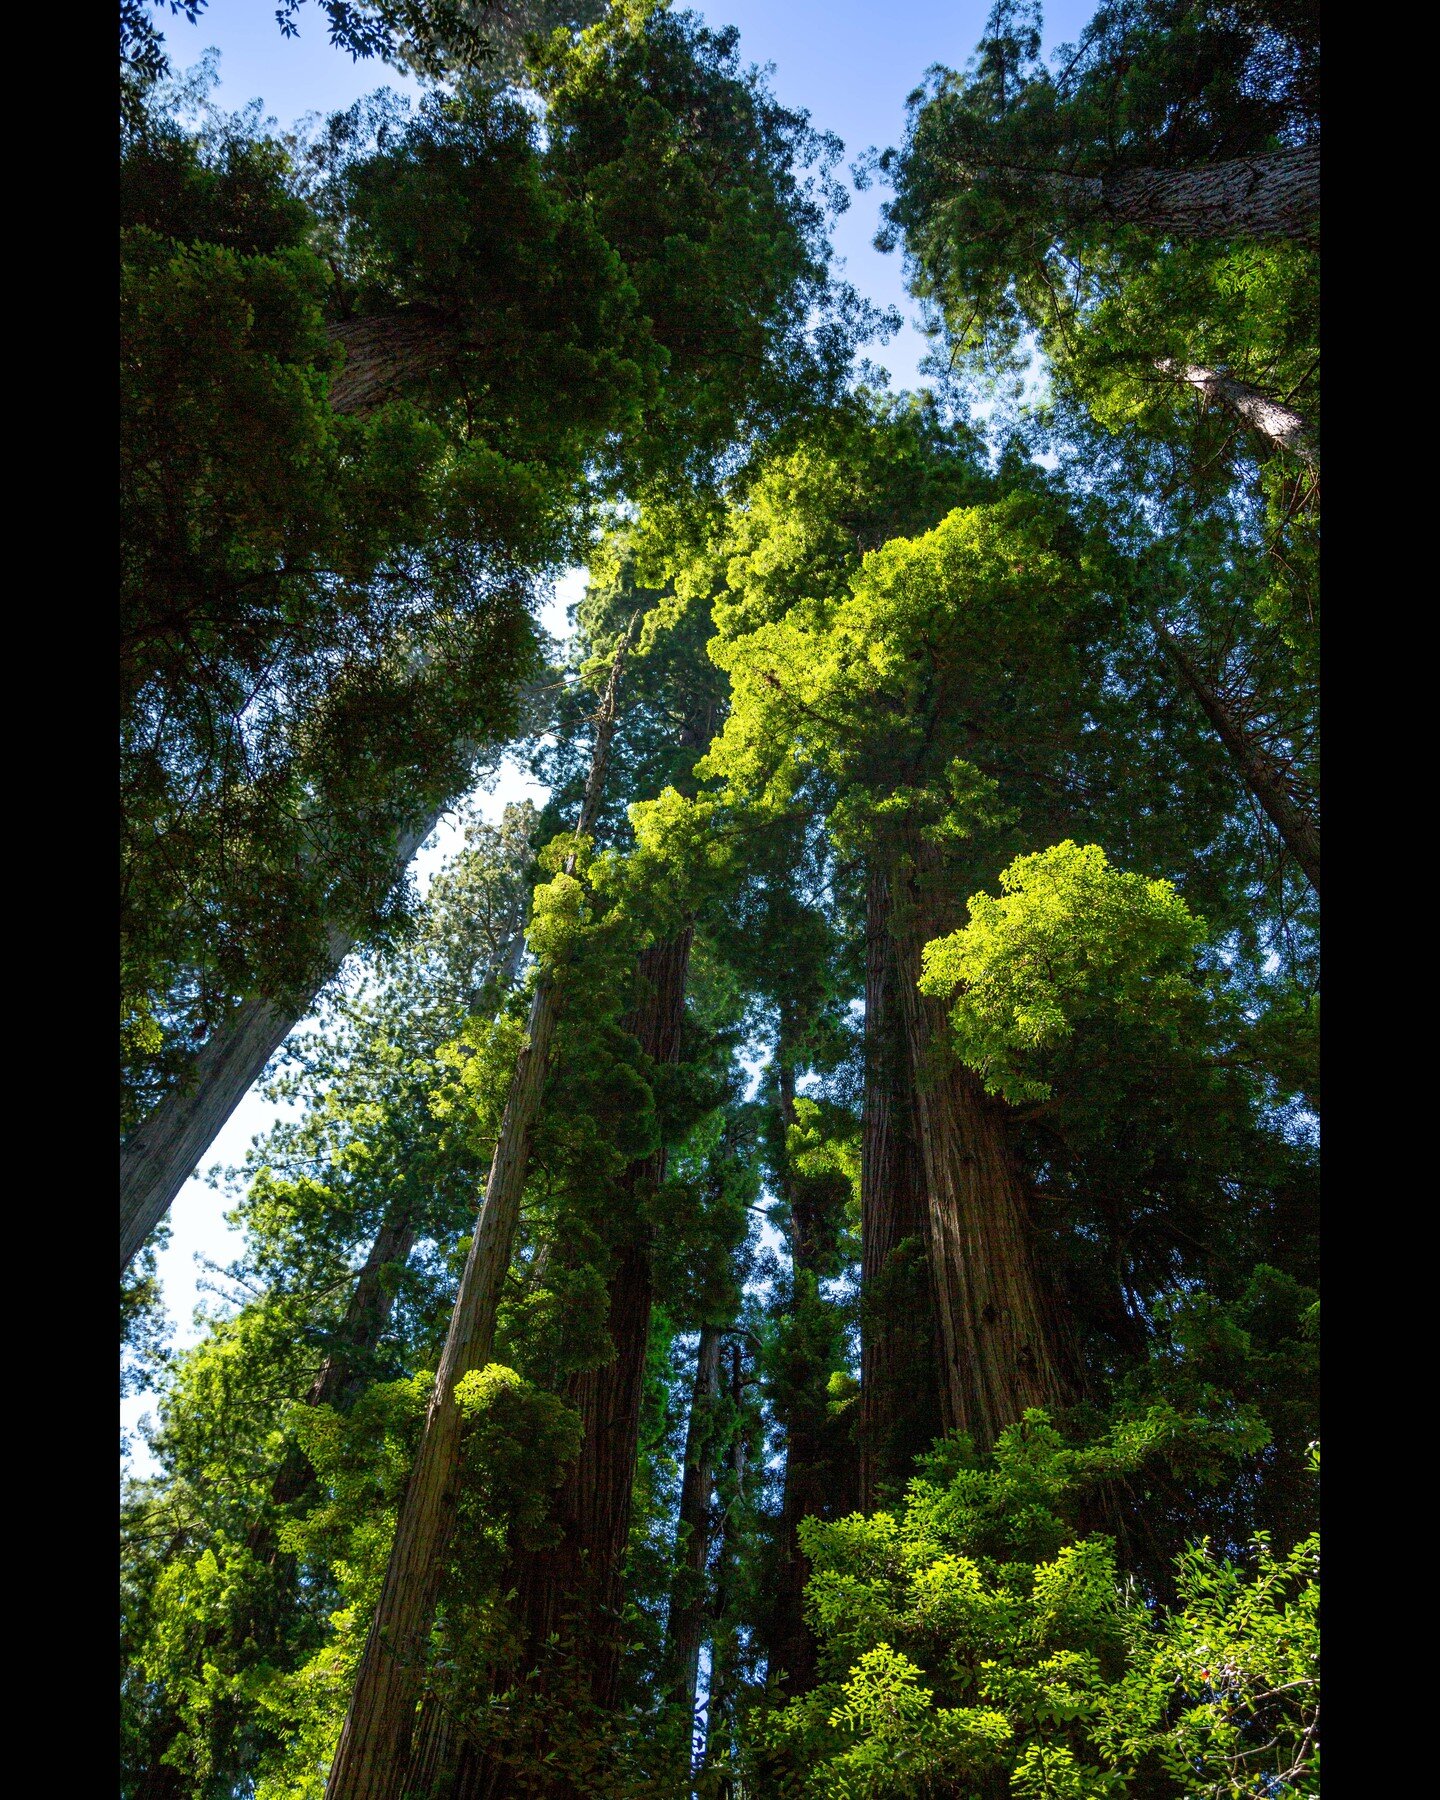 Coastal Redwoods once covered 2 million acres of North America's West coast.